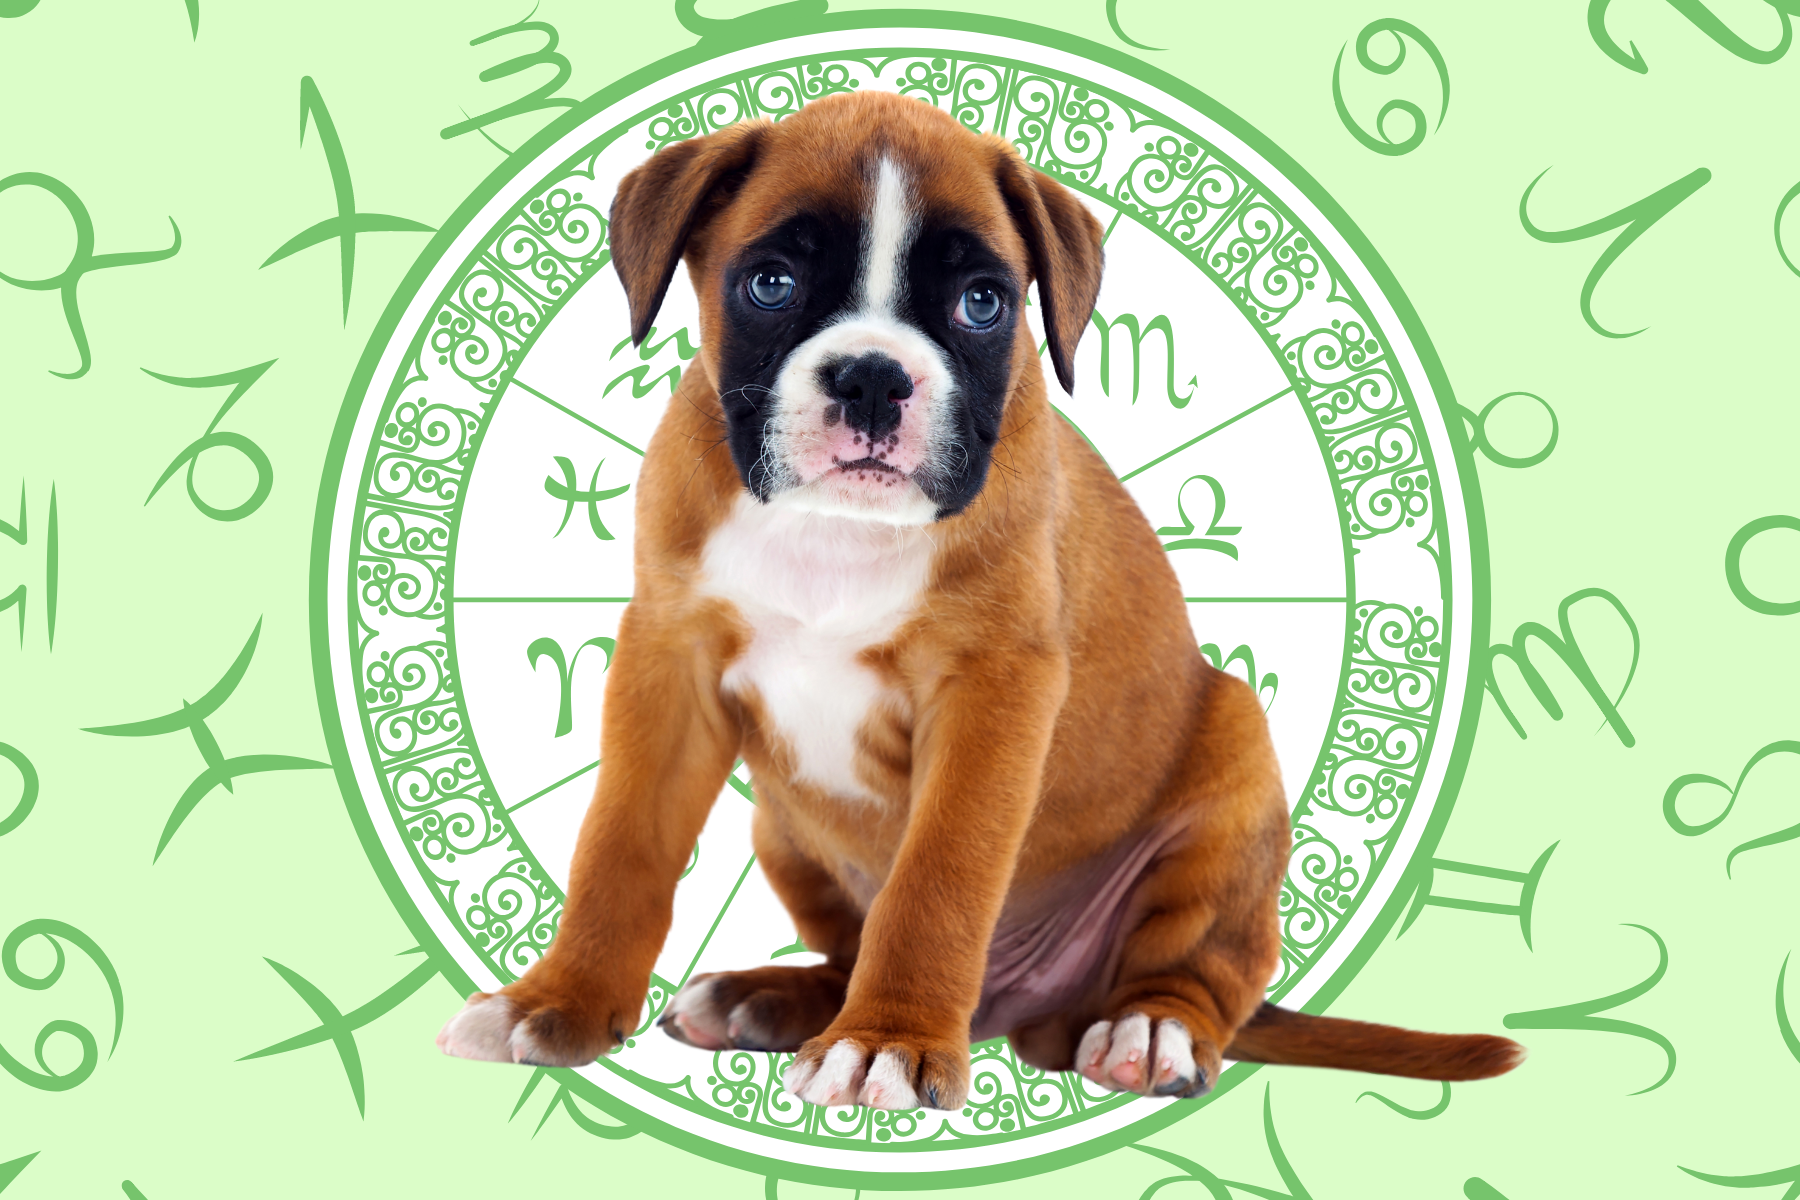 Your Dog's Weekly Horoscope 2020: March 23-29